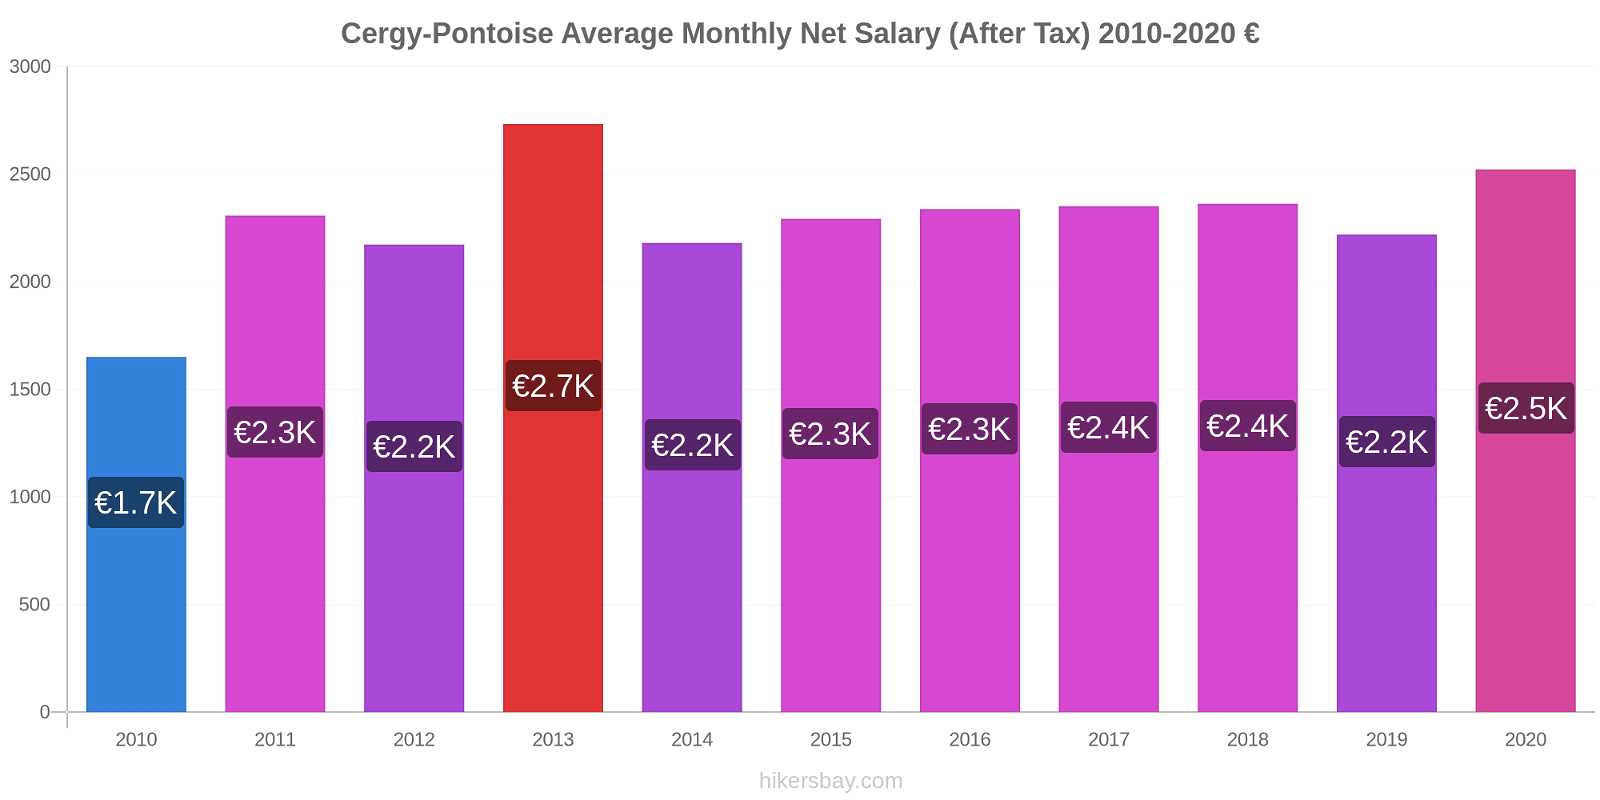 Cergy-Pontoise price changes Average Monthly Net Salary (After Tax) hikersbay.com